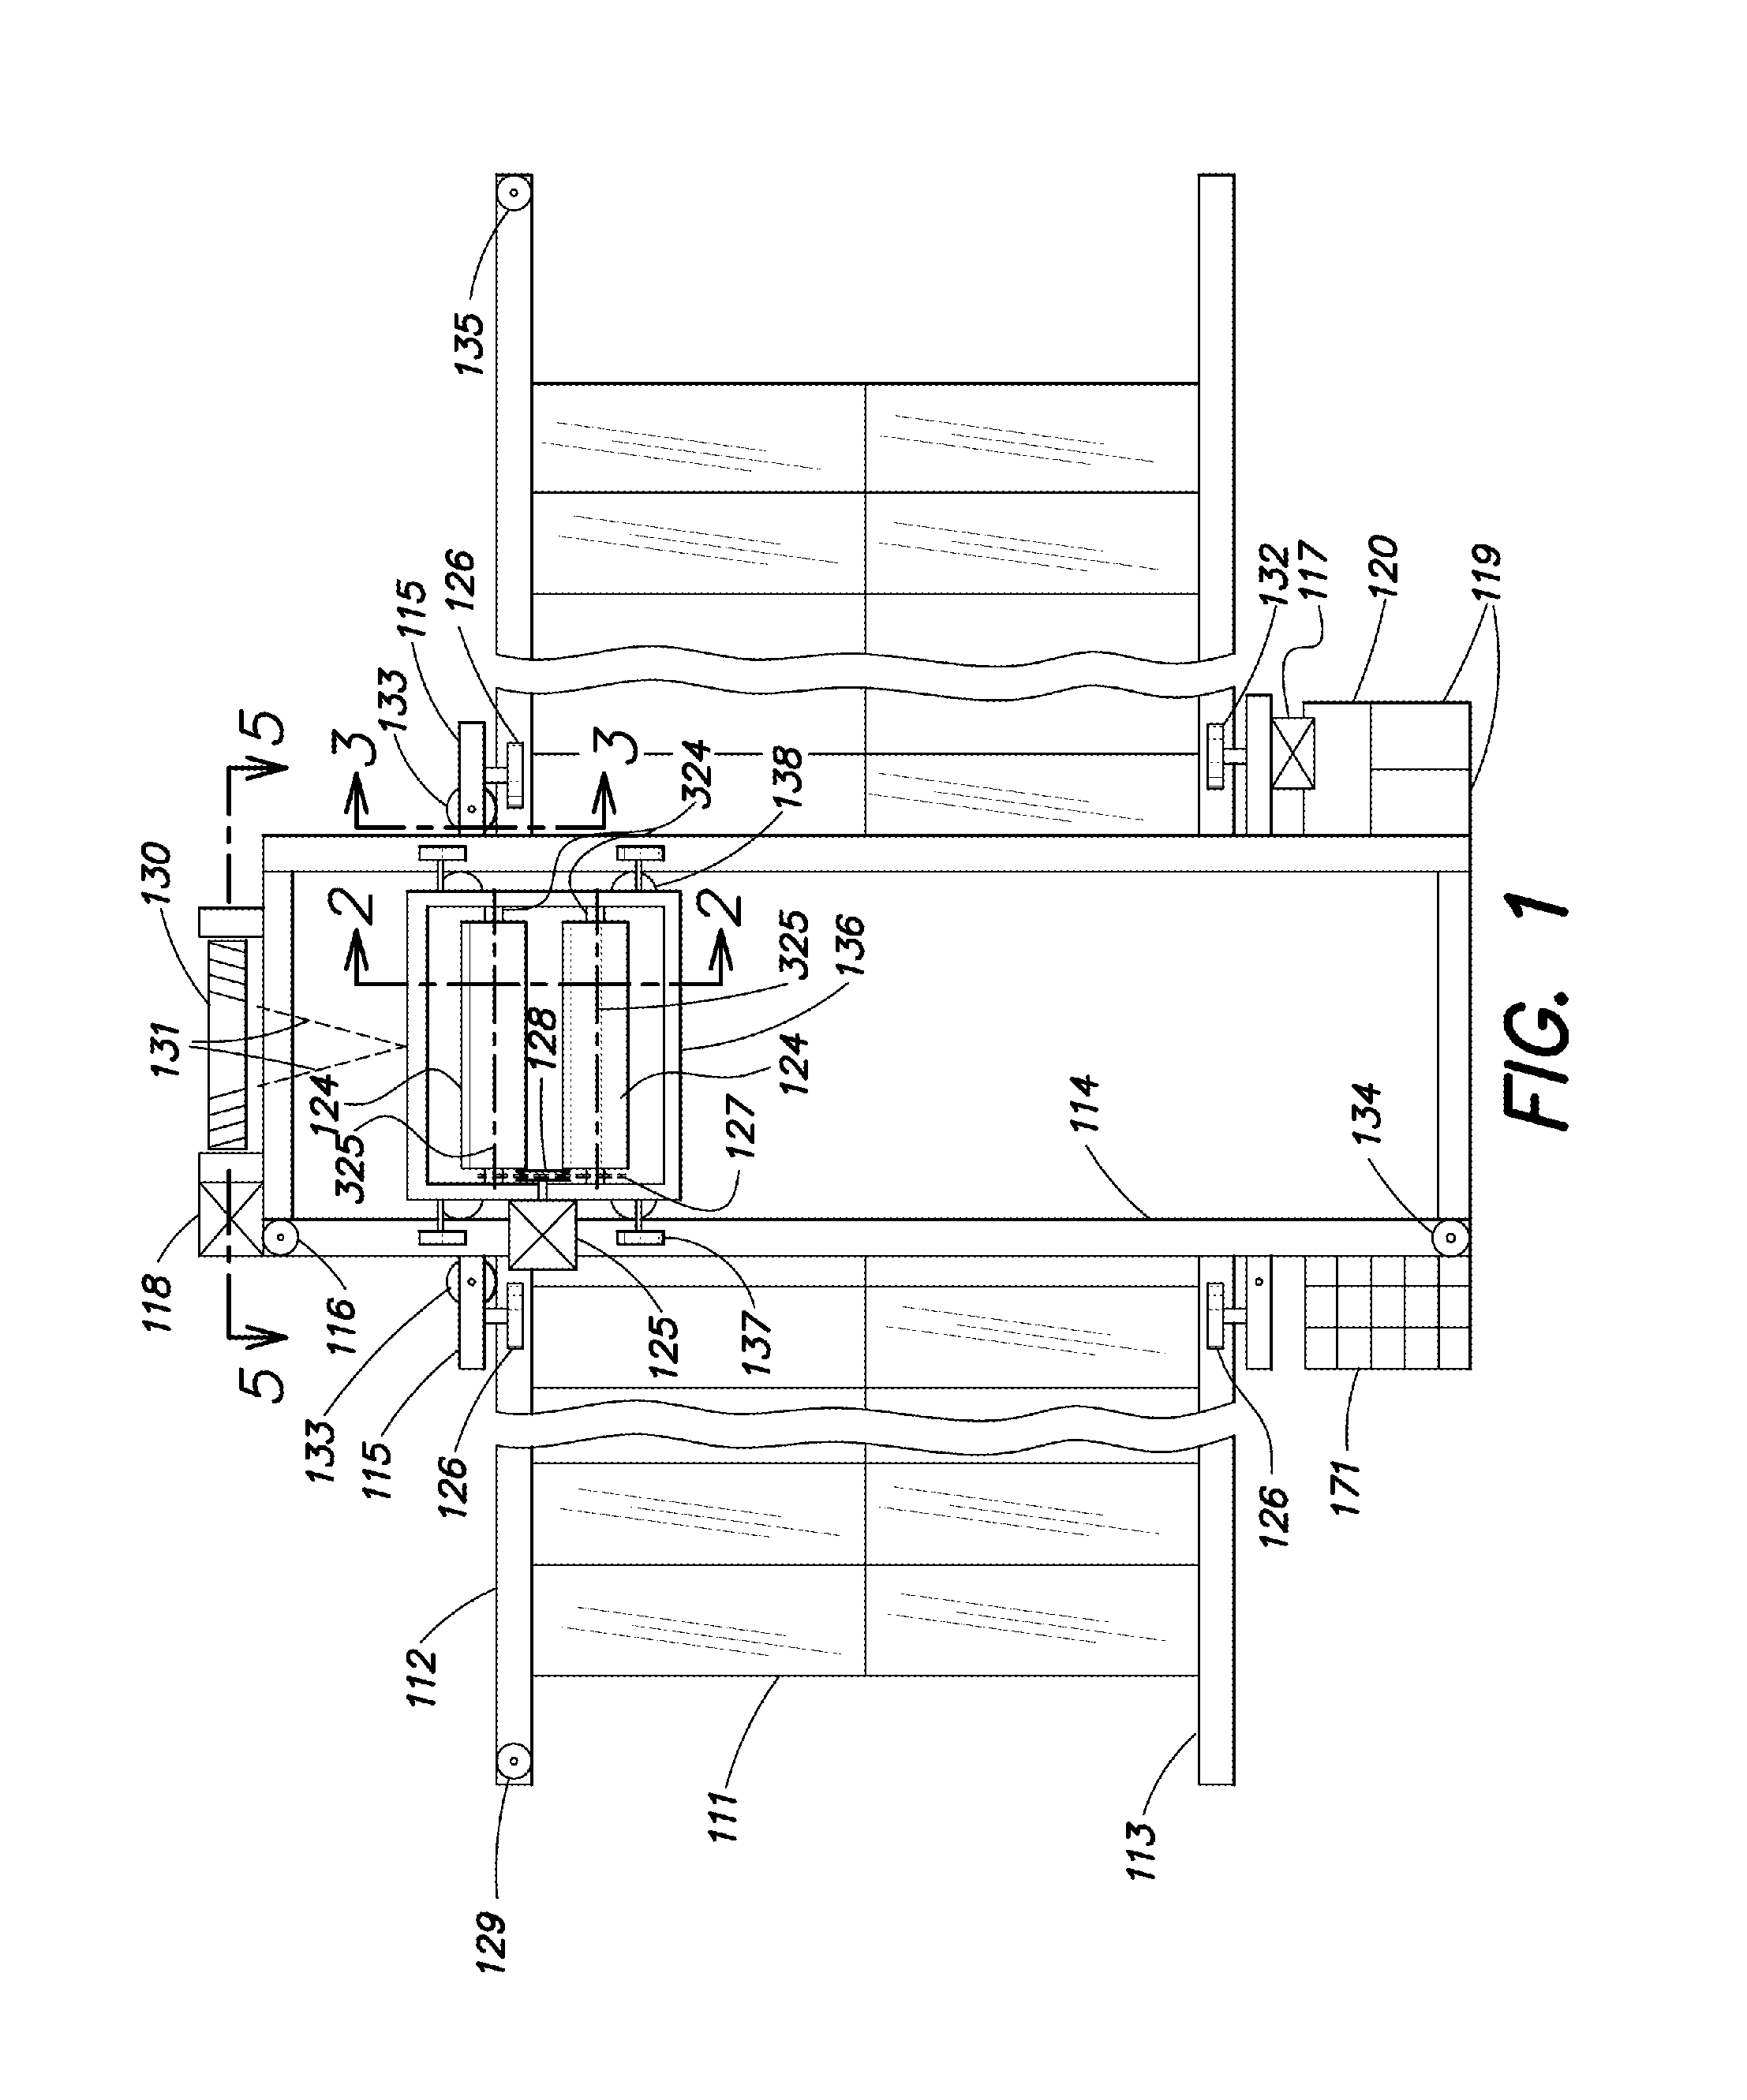 Solar panel cleaning system and method